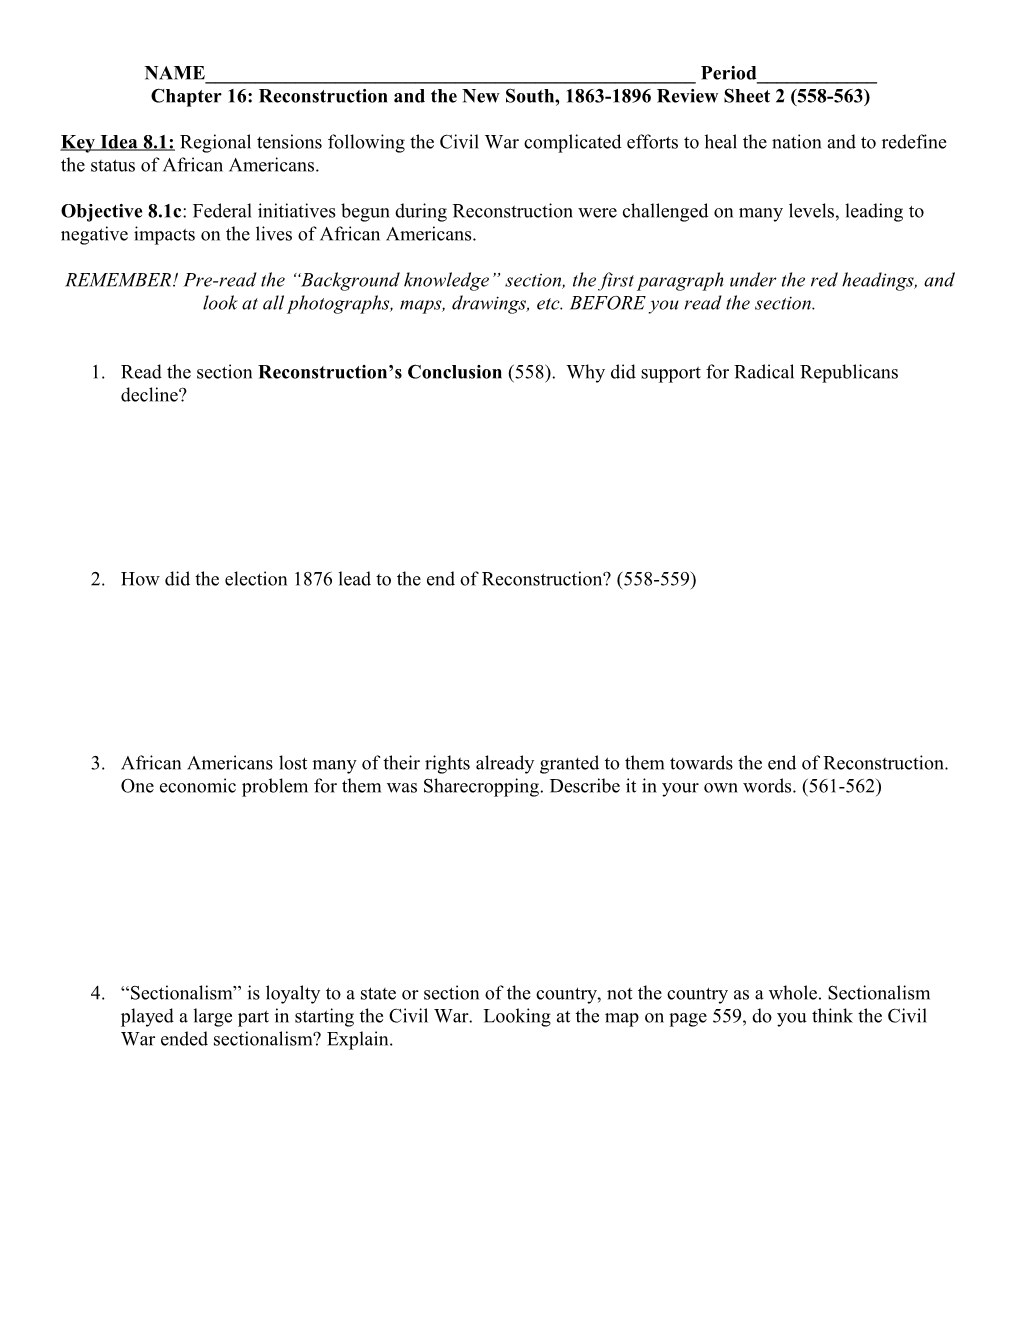 Chapter 16: Reconstruction and the New South, 1863-1896 Review Sheet 1